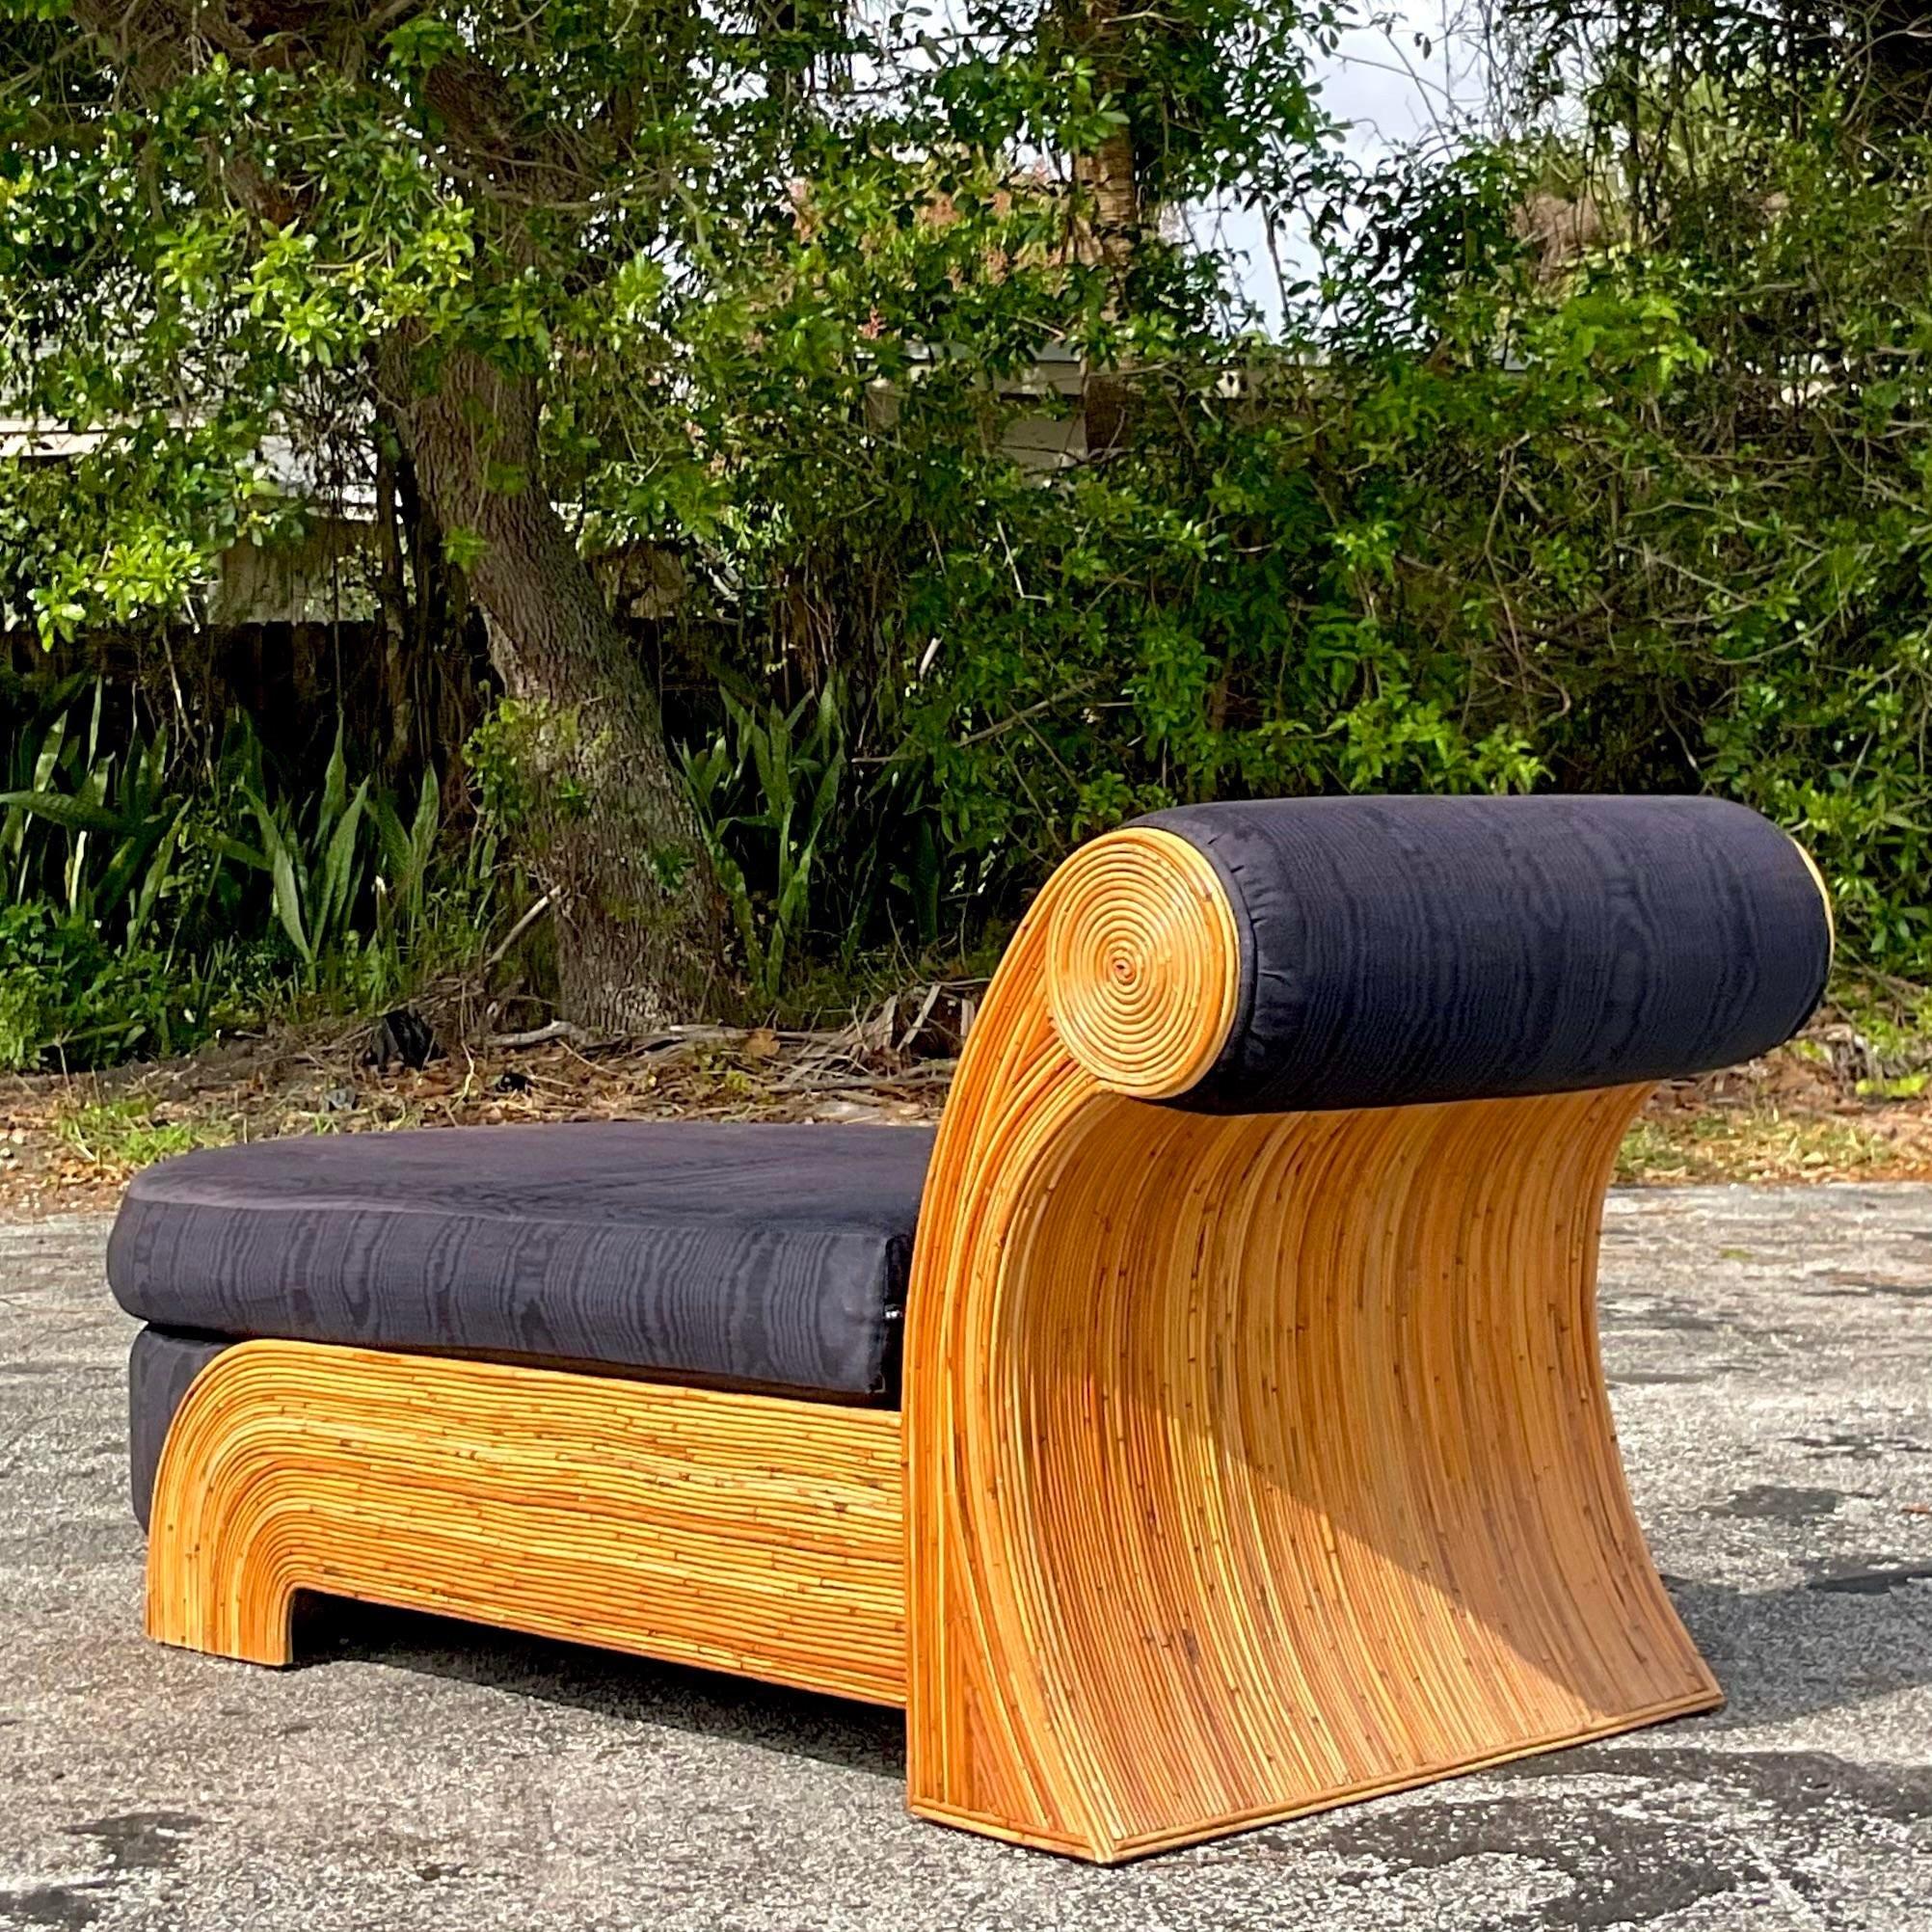 A fantastic vintage Coastal chaise lounge. Made by the iconic Comfort Designs and tagged on the bottom. A chic pencil reed frame in a fab scroll design. Acquired from a Palm Beach estate.